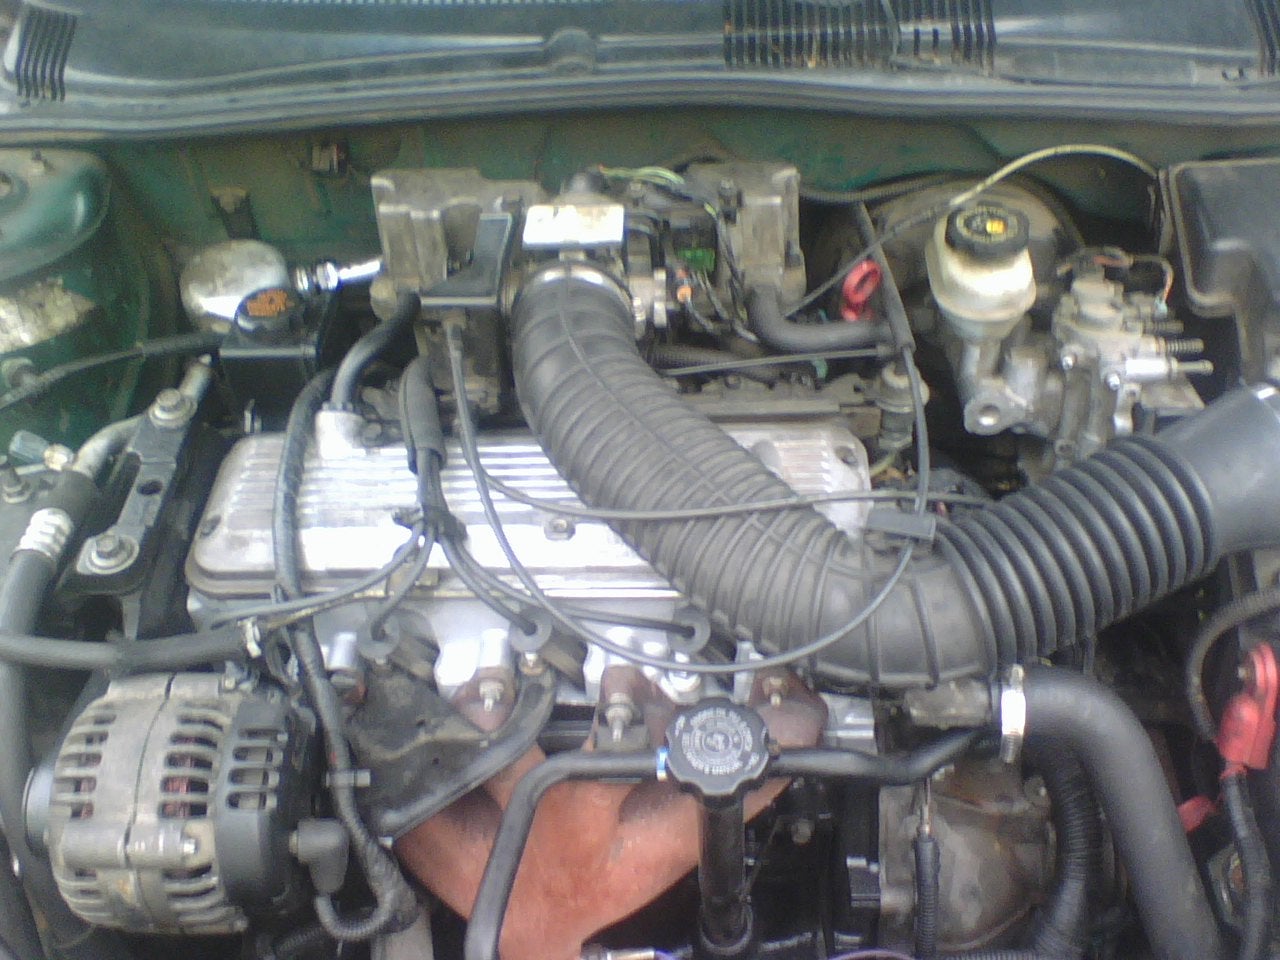 1997 Chevrolet Cavalier - Other Pictures - CarGurus